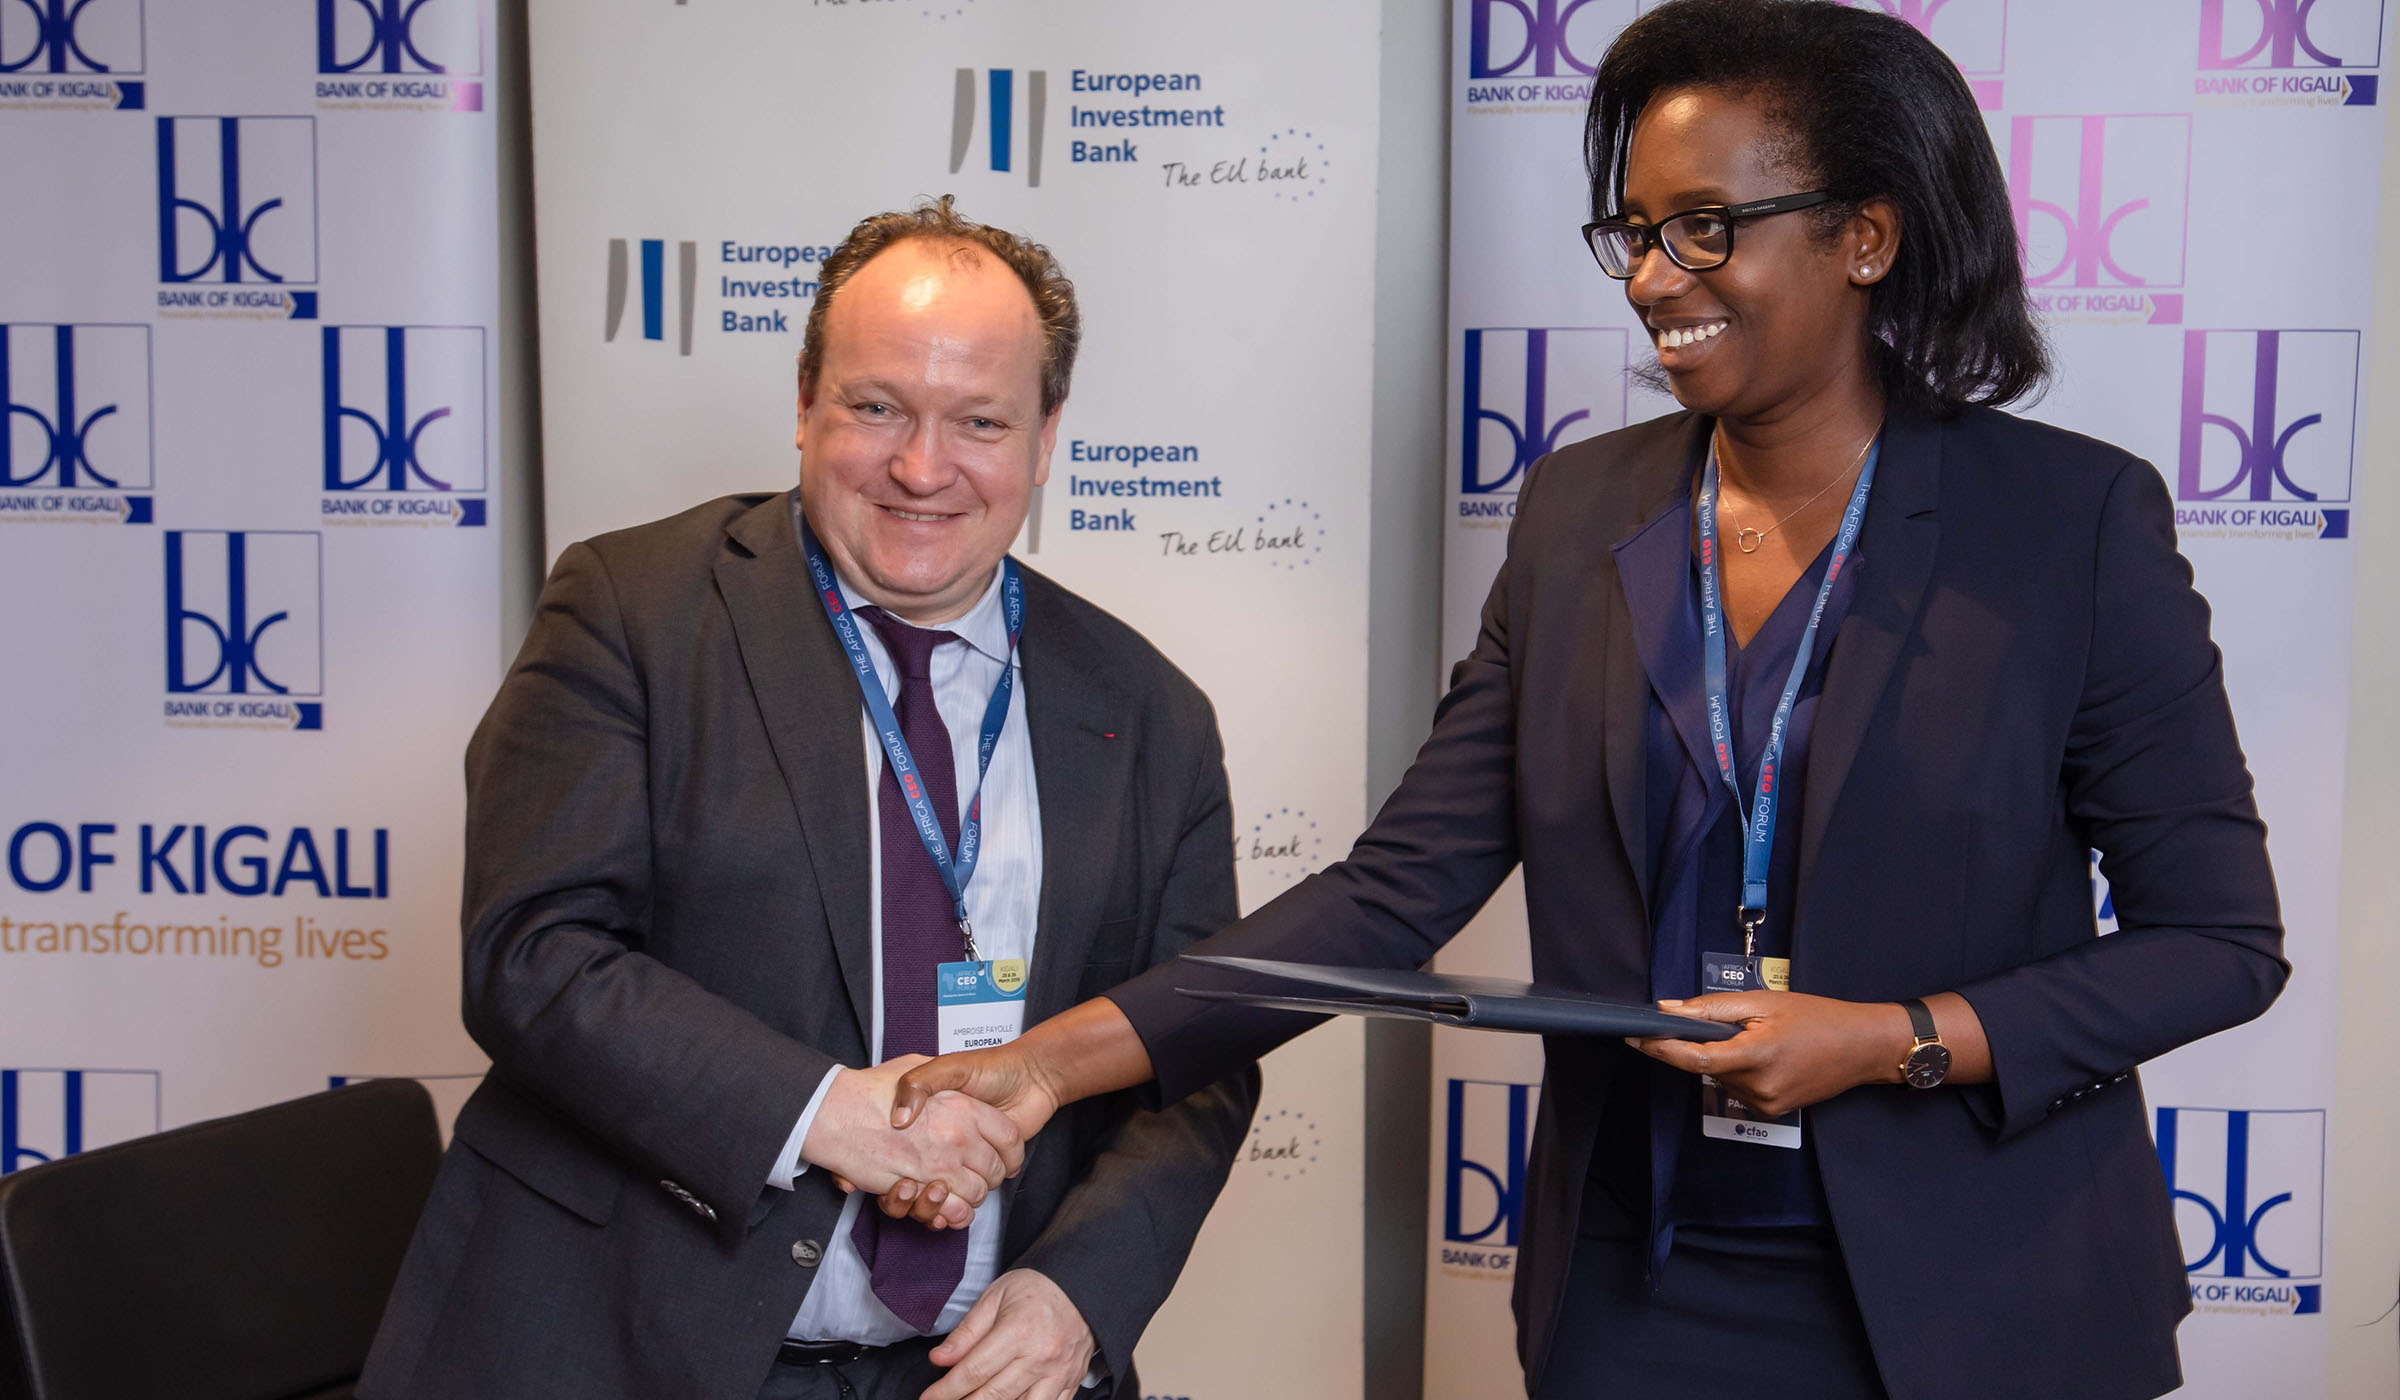 Dr. Diane Karusisi, the Chief Executive Officer of Bank of Kigali with Ambroise Fayolle, the Vice President of the European Investment Bank exchange documents after the signing ceremony on March 25, 2019 at Kigal. Emmanuel Kwizera.